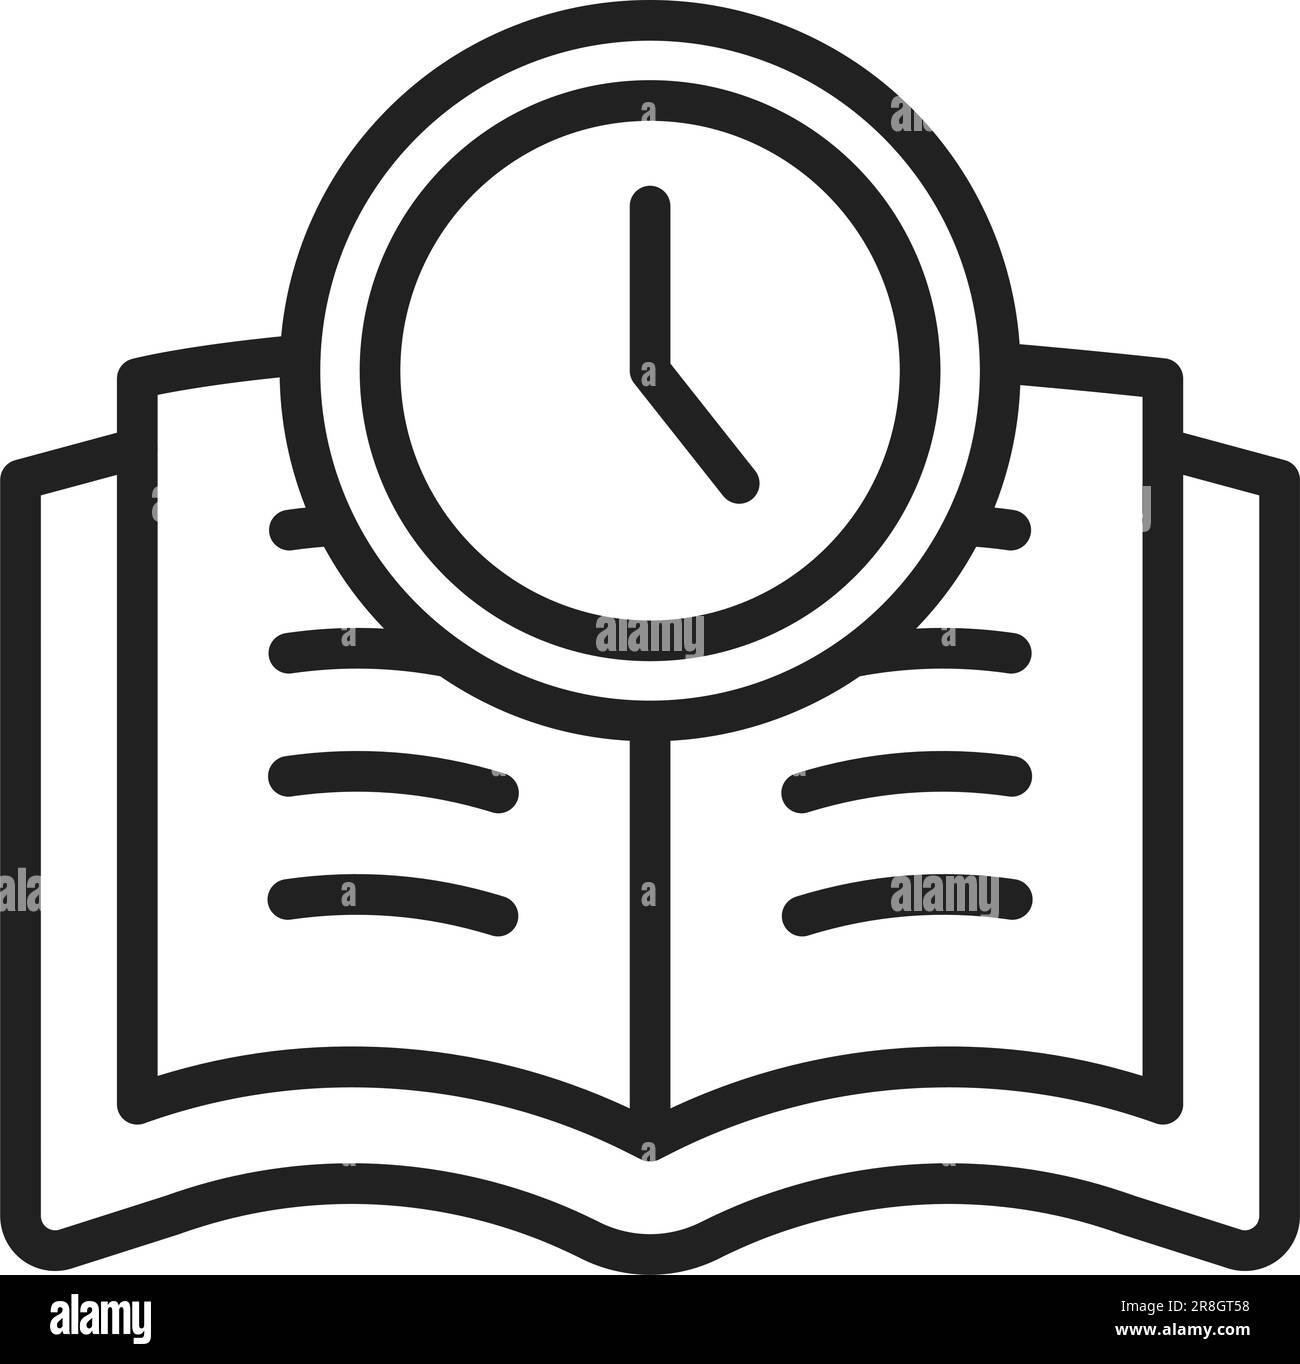 Time To Study Icon Image. Stock Vector